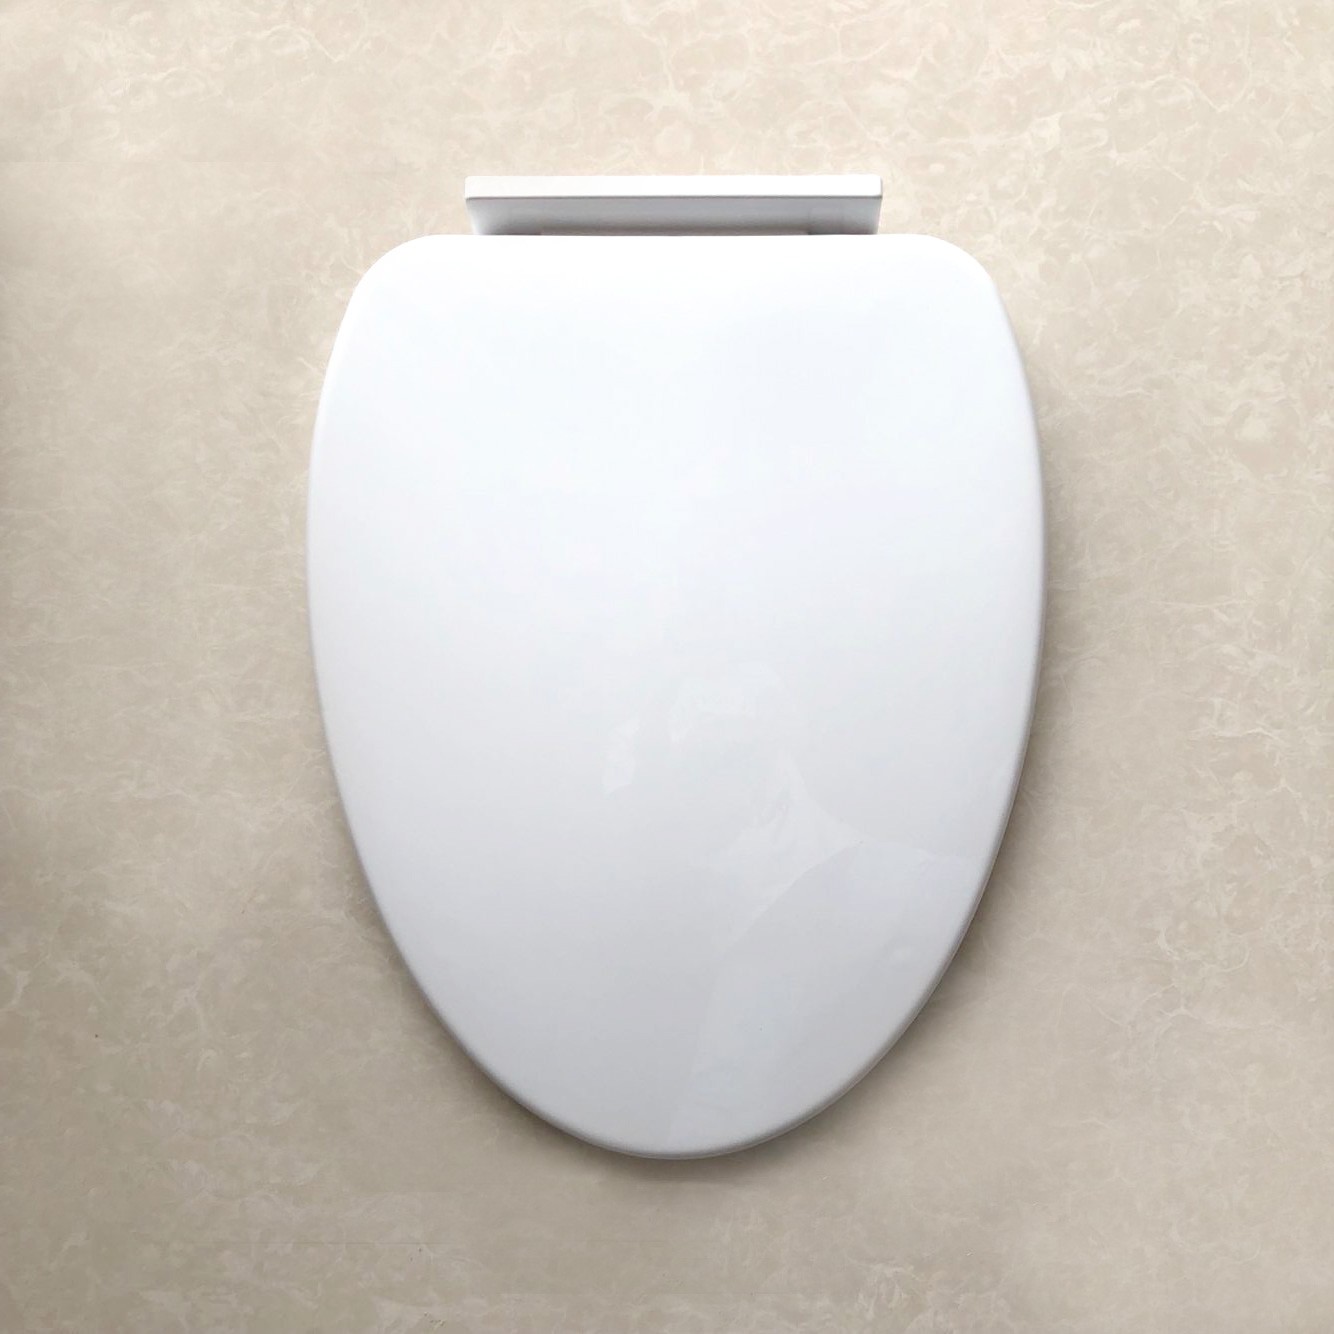 Duroplast plastic closed front v shape 18 inches elongated toilet seat lid toilet seat soft close